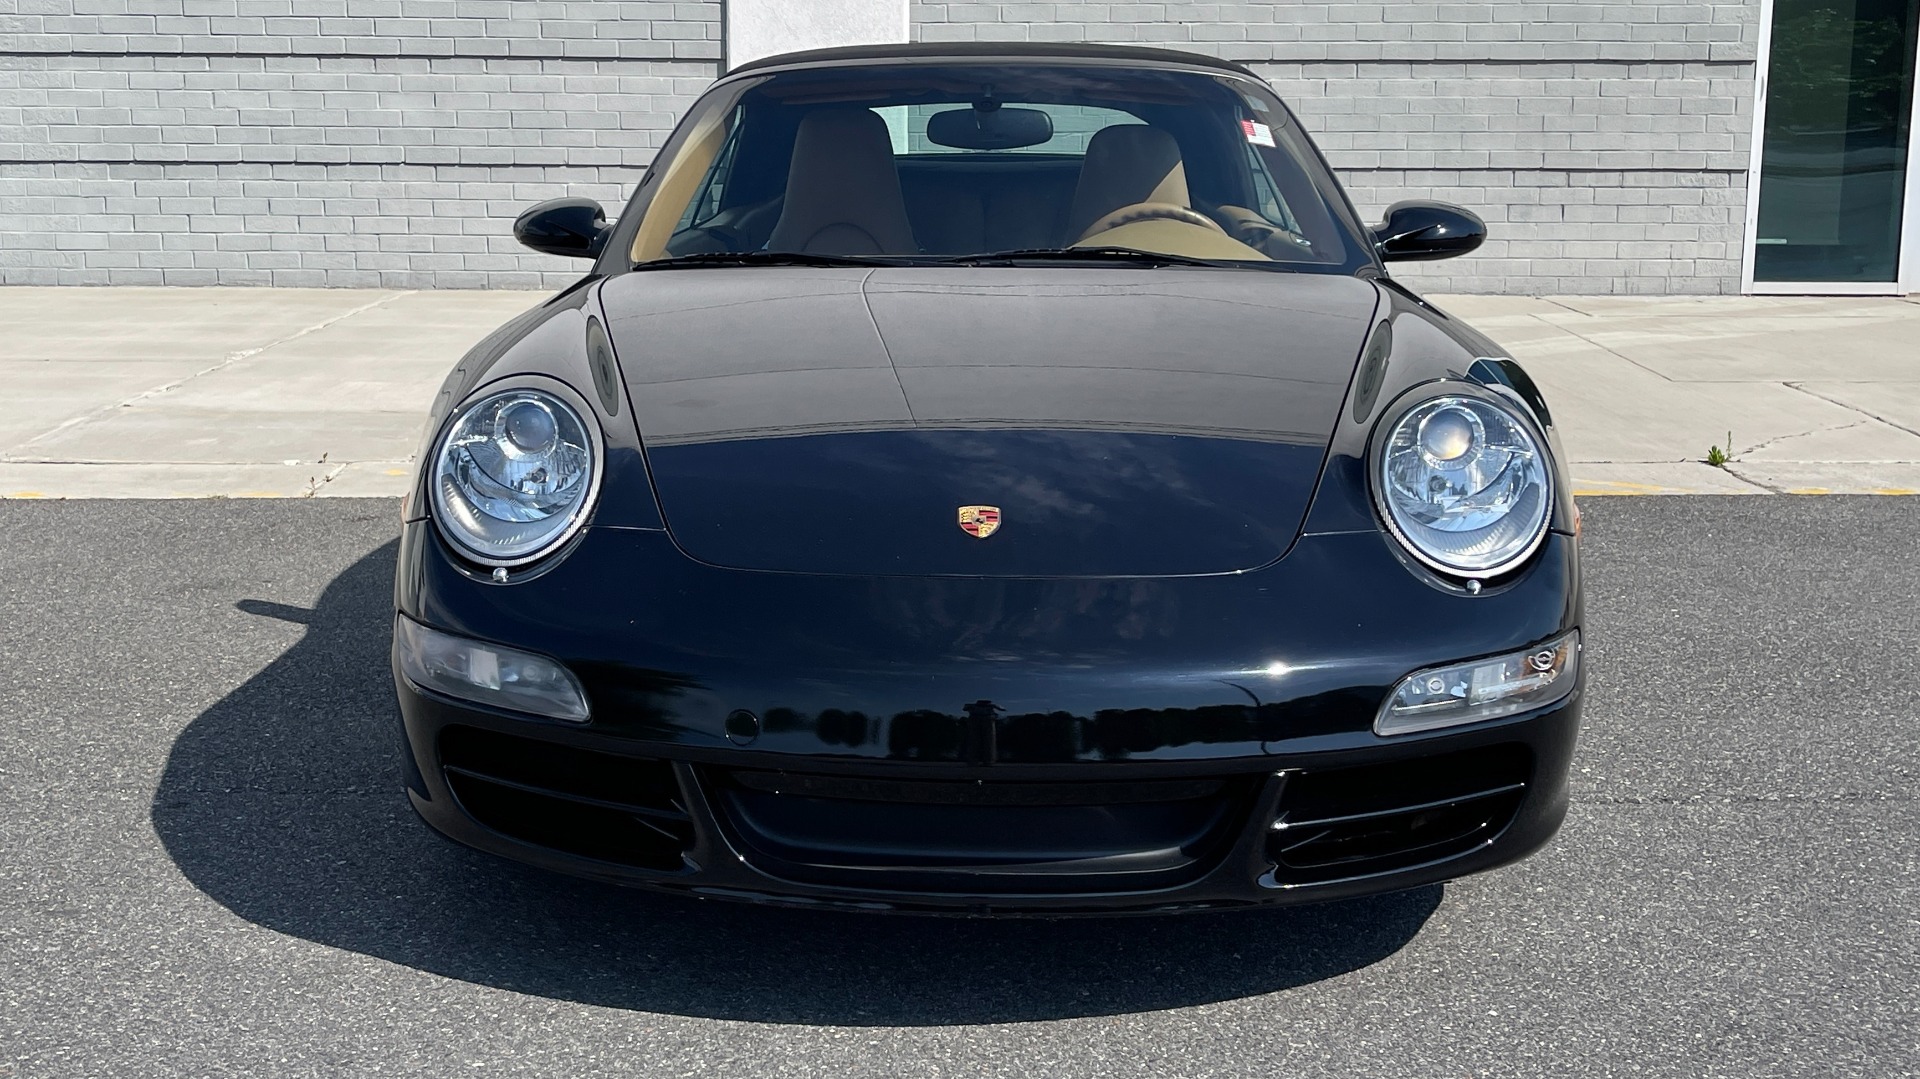 Used 2006 Porsche 911 CARRERA S CABRIOLET / BOSE / CD CHANGER / PWR SEAT PKG / HTD STS for sale $60,999 at Formula Imports in Charlotte NC 28227 25